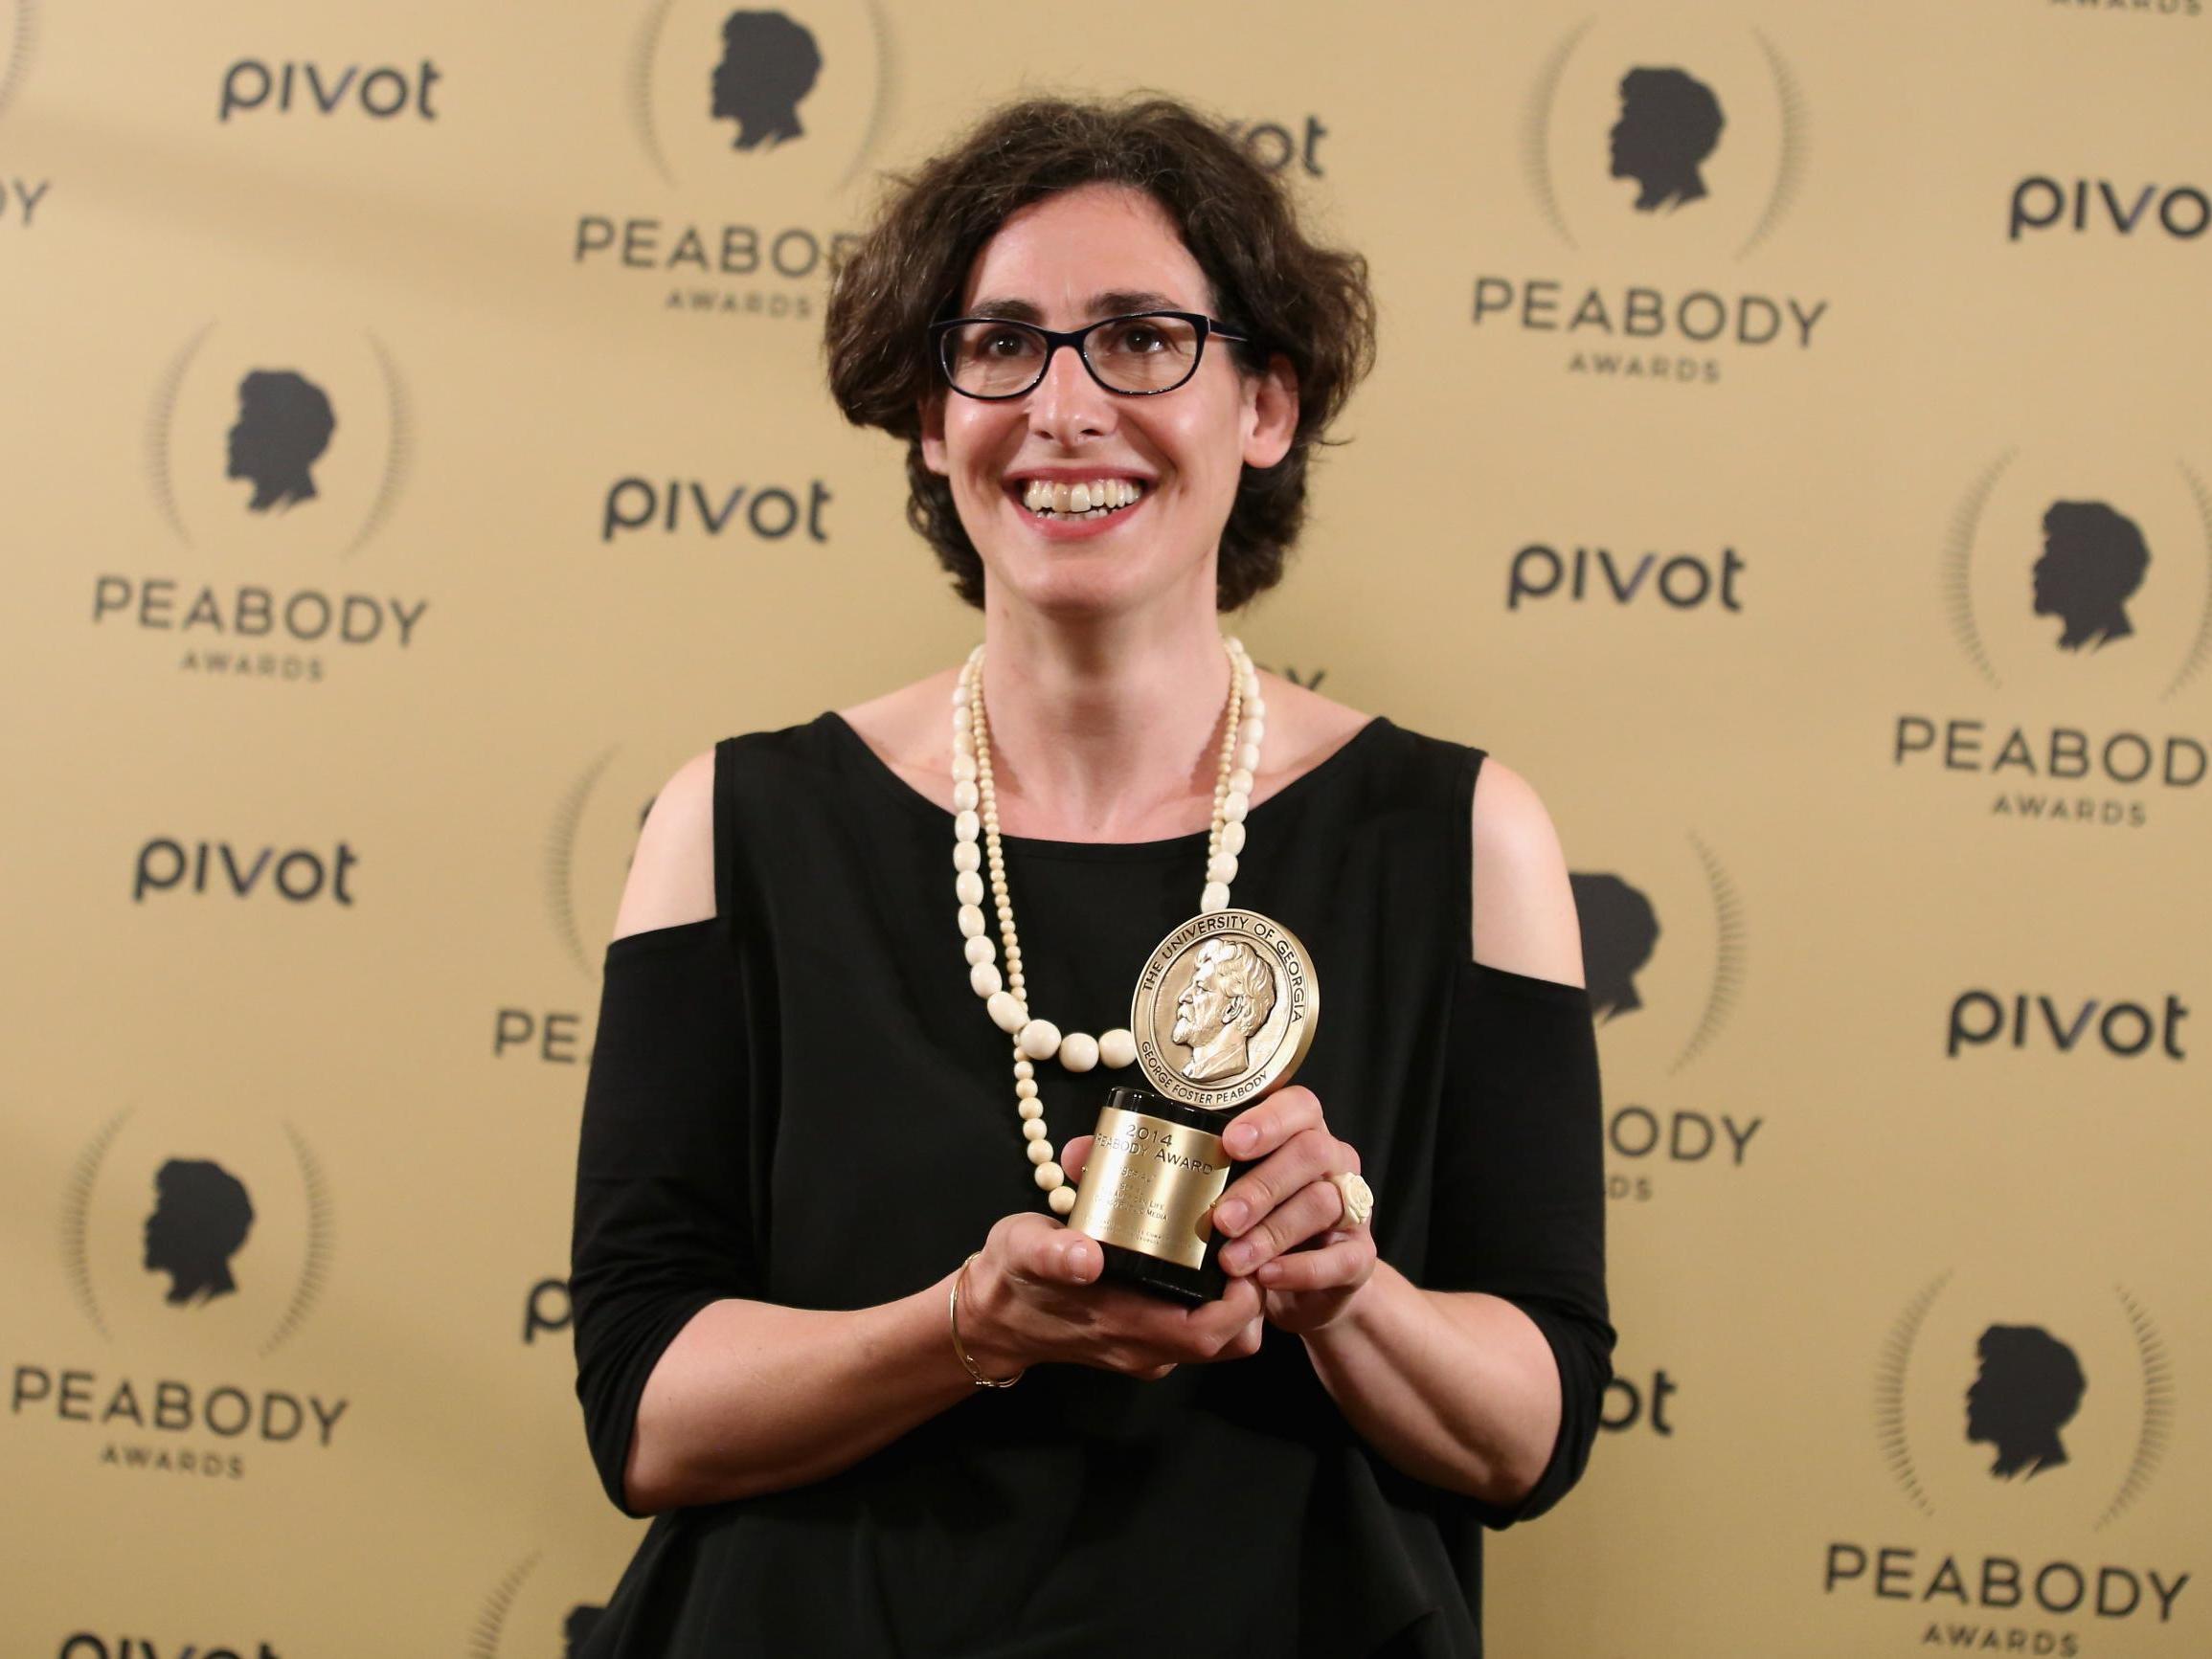 Sarah Koenig with the Peabody Award for ‘Serial’, which was honoured for taking podcasting into the cultural mainstream